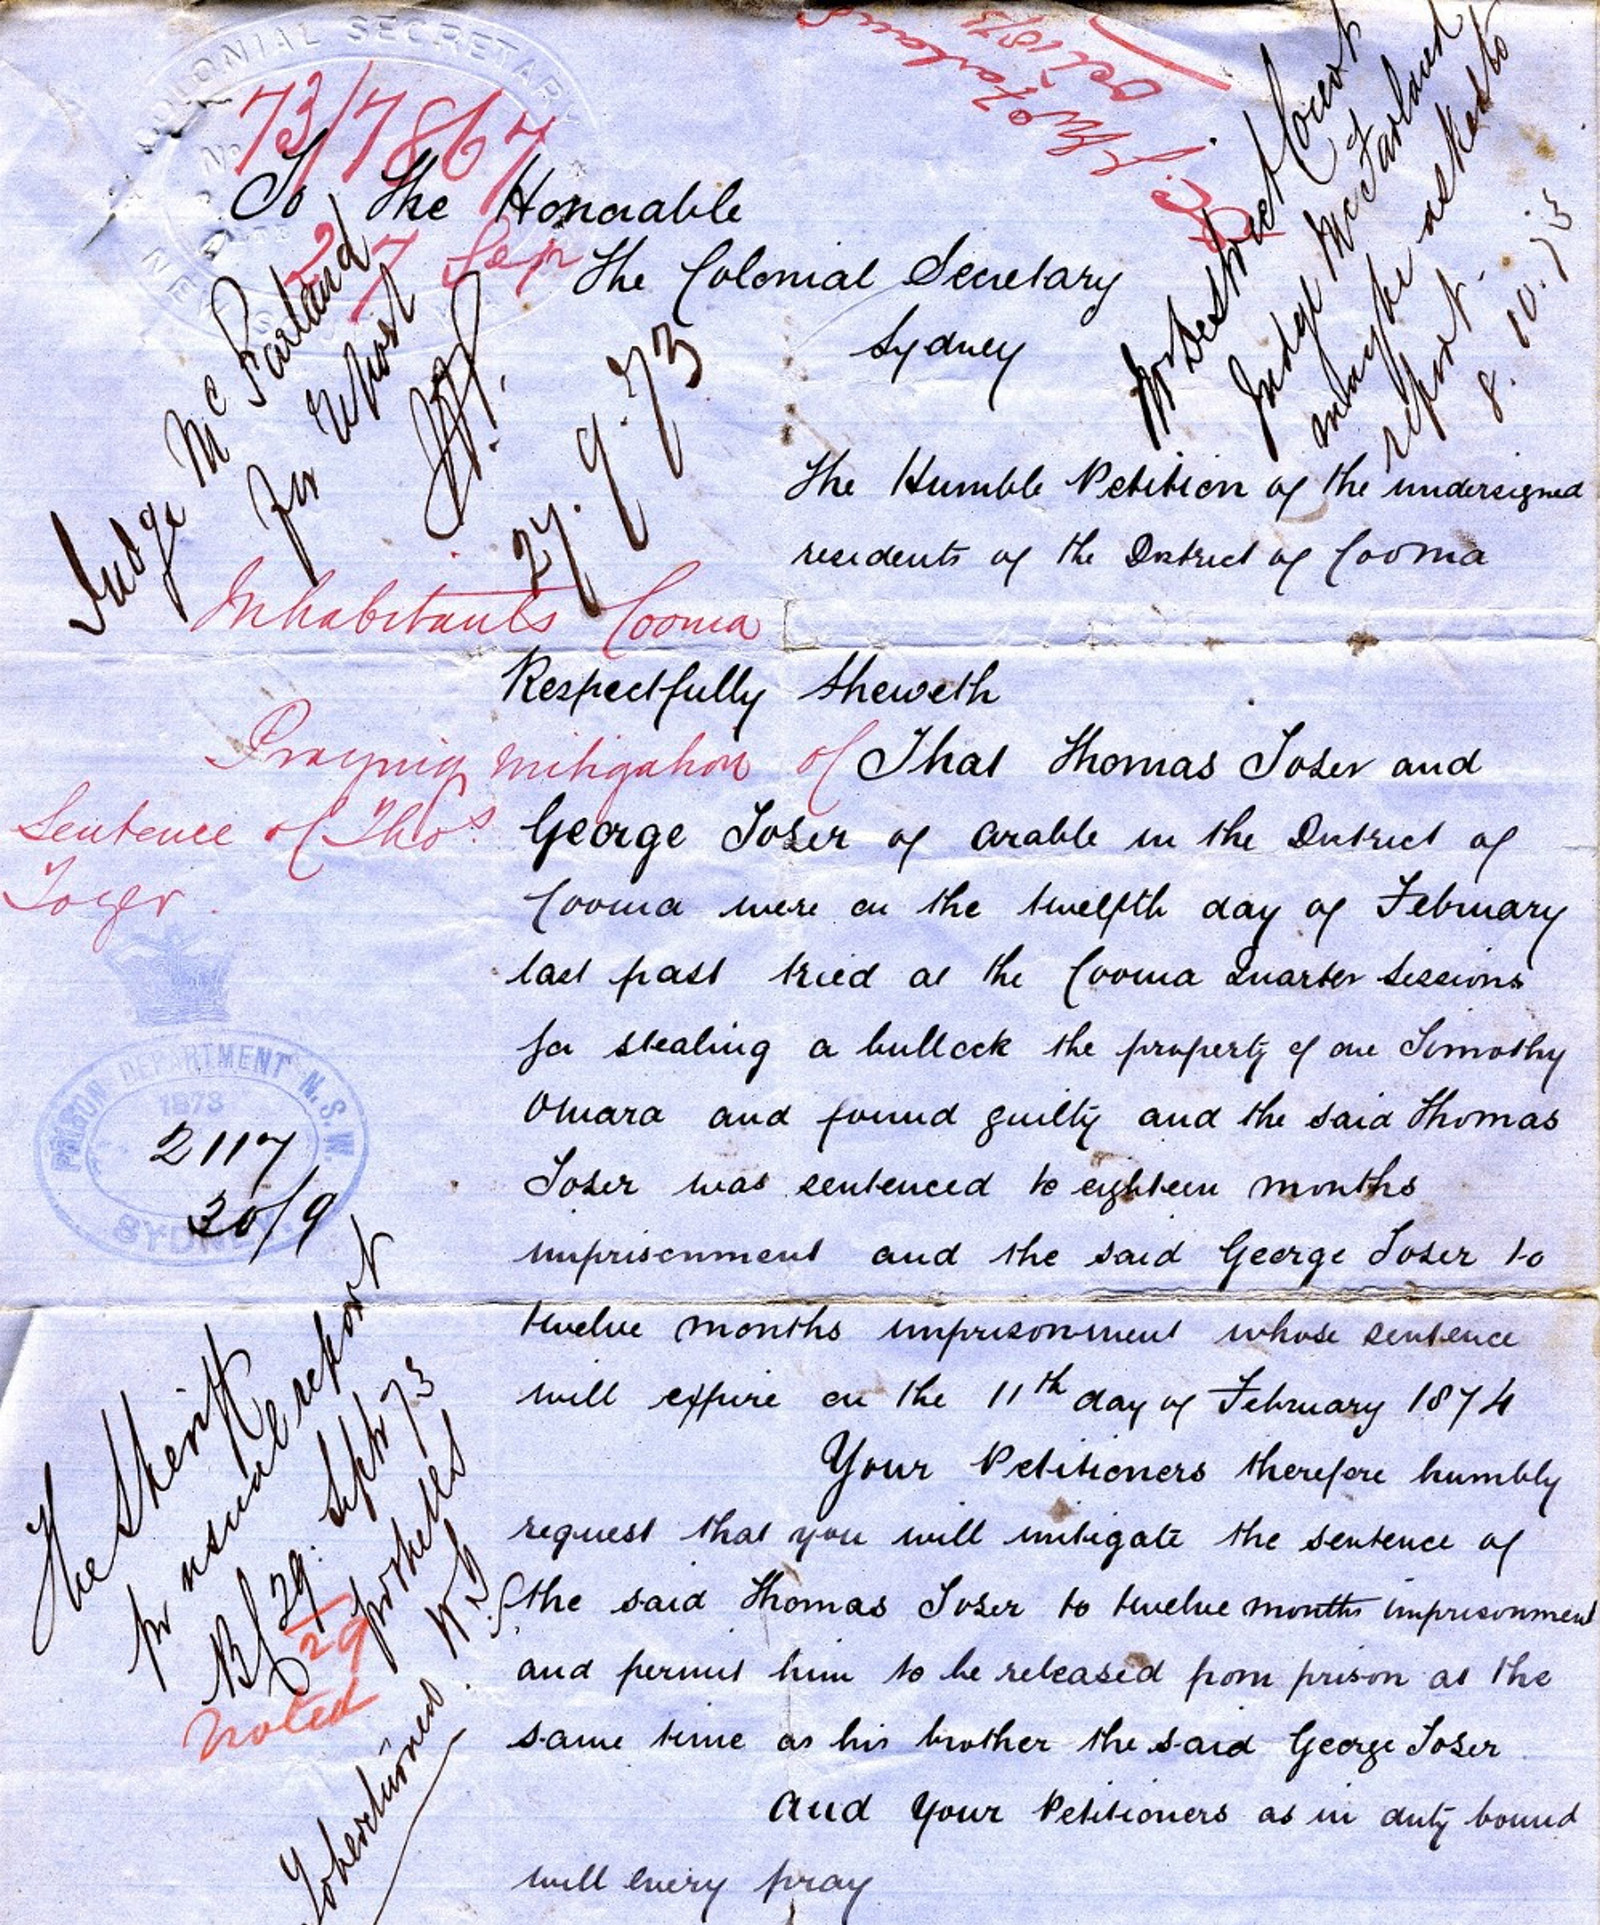 Page 1 of a petition to the Colonial Secretary NRS 905 1-2231 letter 73-7867 for the mitigation of the gaol sentence of Thomas Toser, previously convicted of stealing a bullock from Timothy O'Mara in 1873. Three pages of signatures include Dalgety